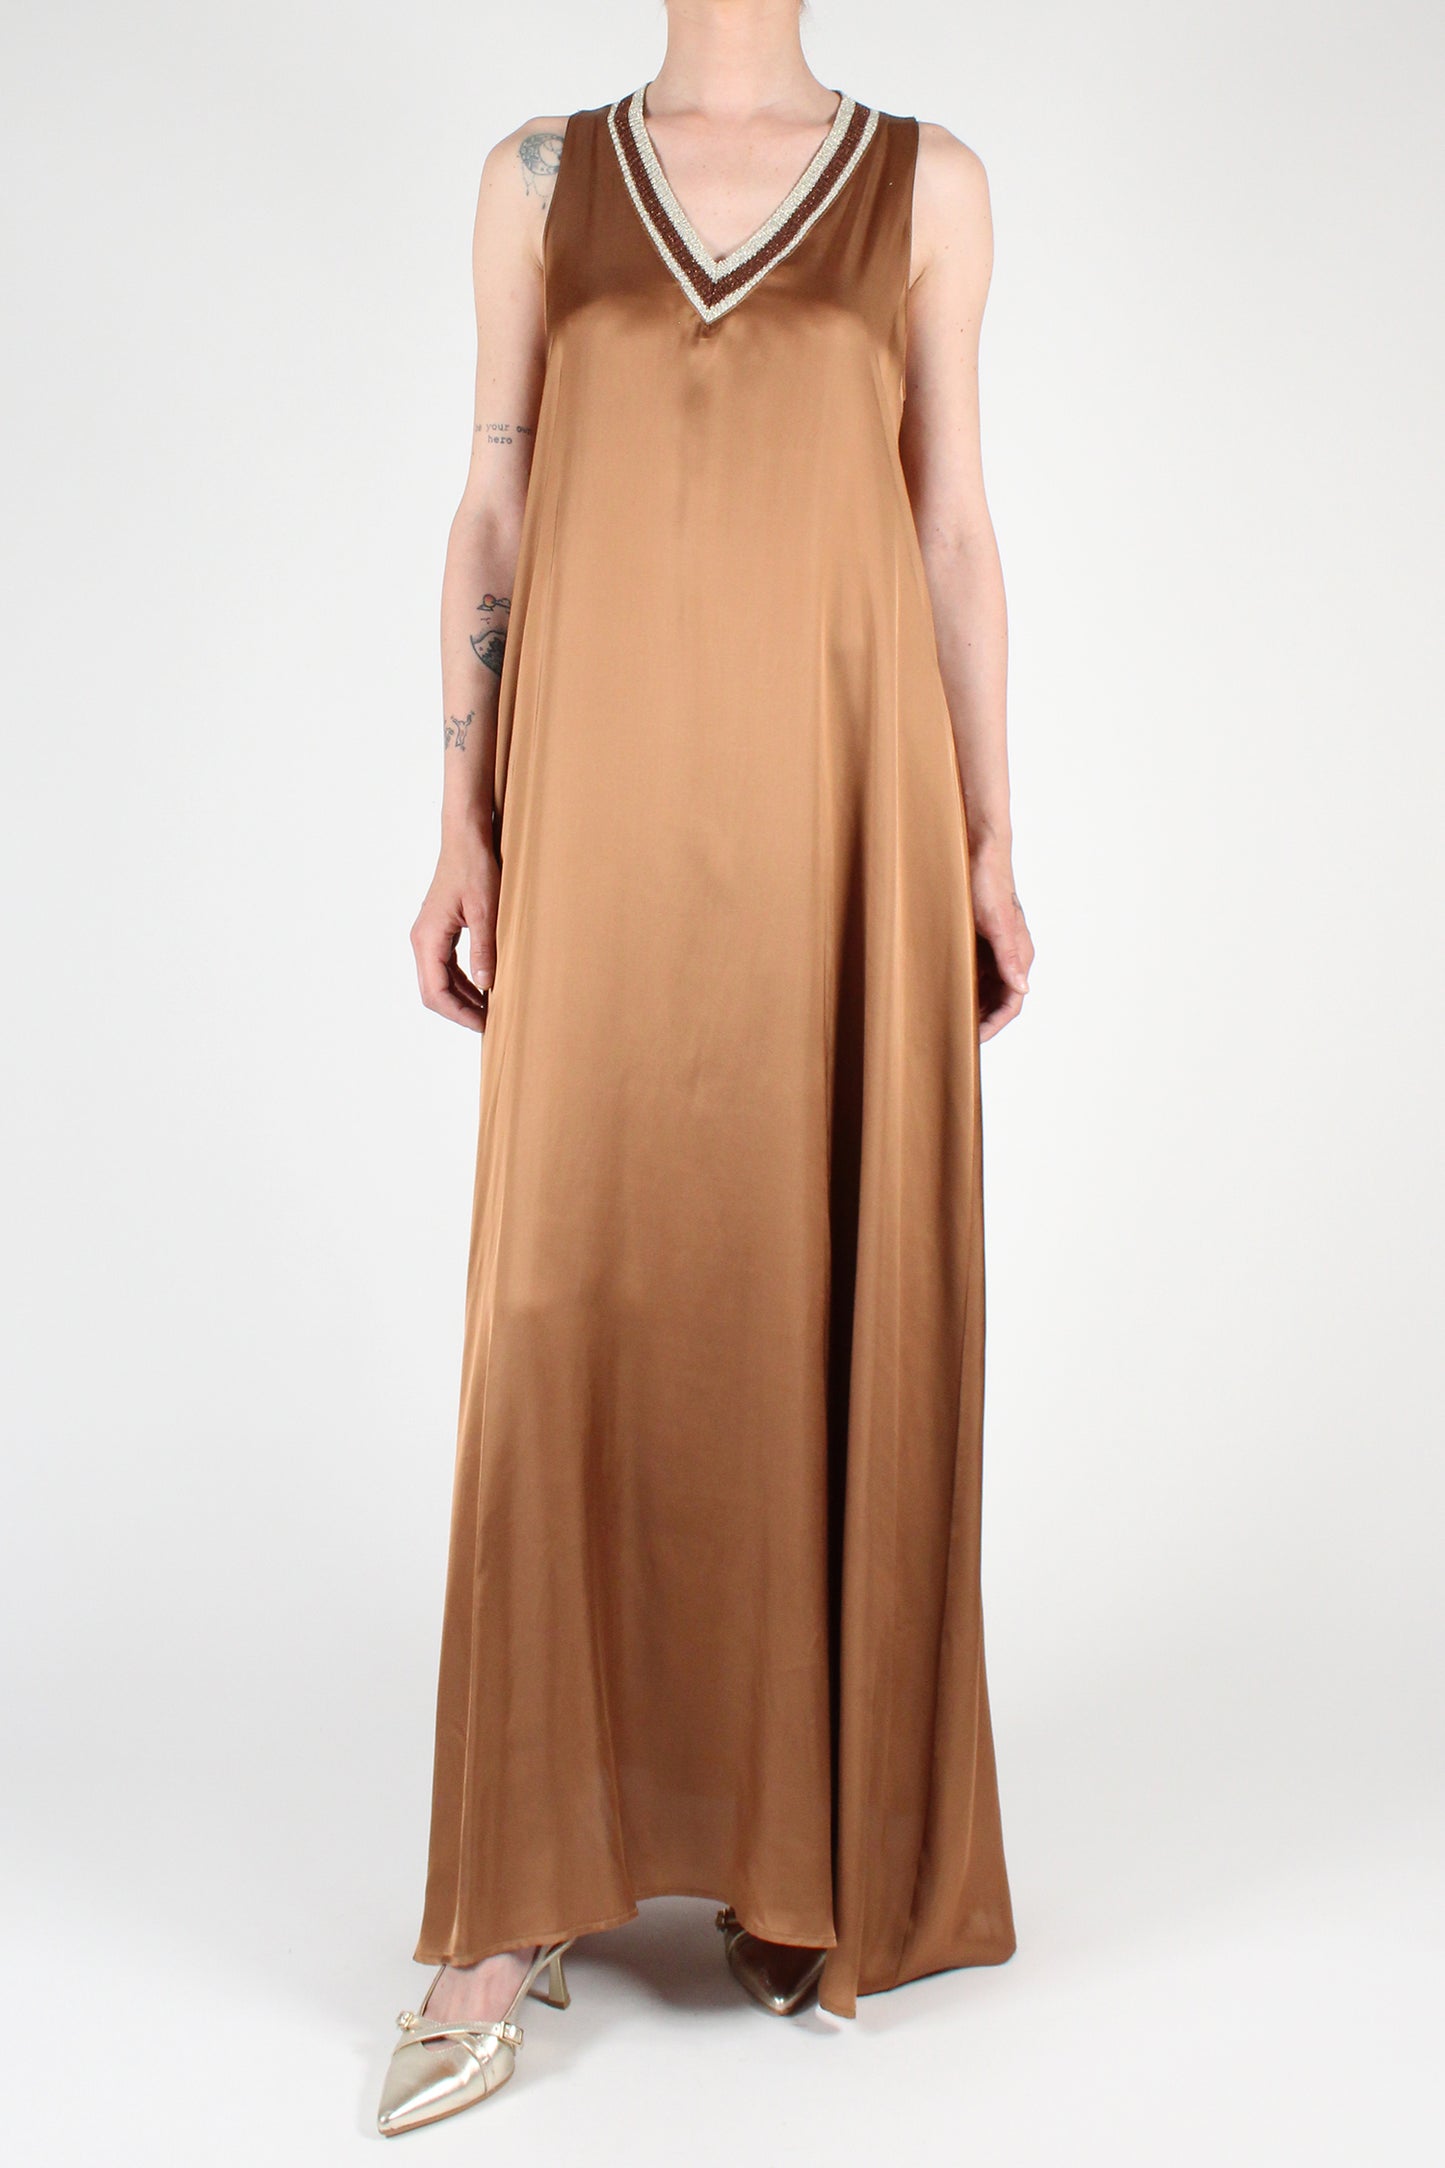 Long V-neck dress in Viscose with Lurex sports band detail